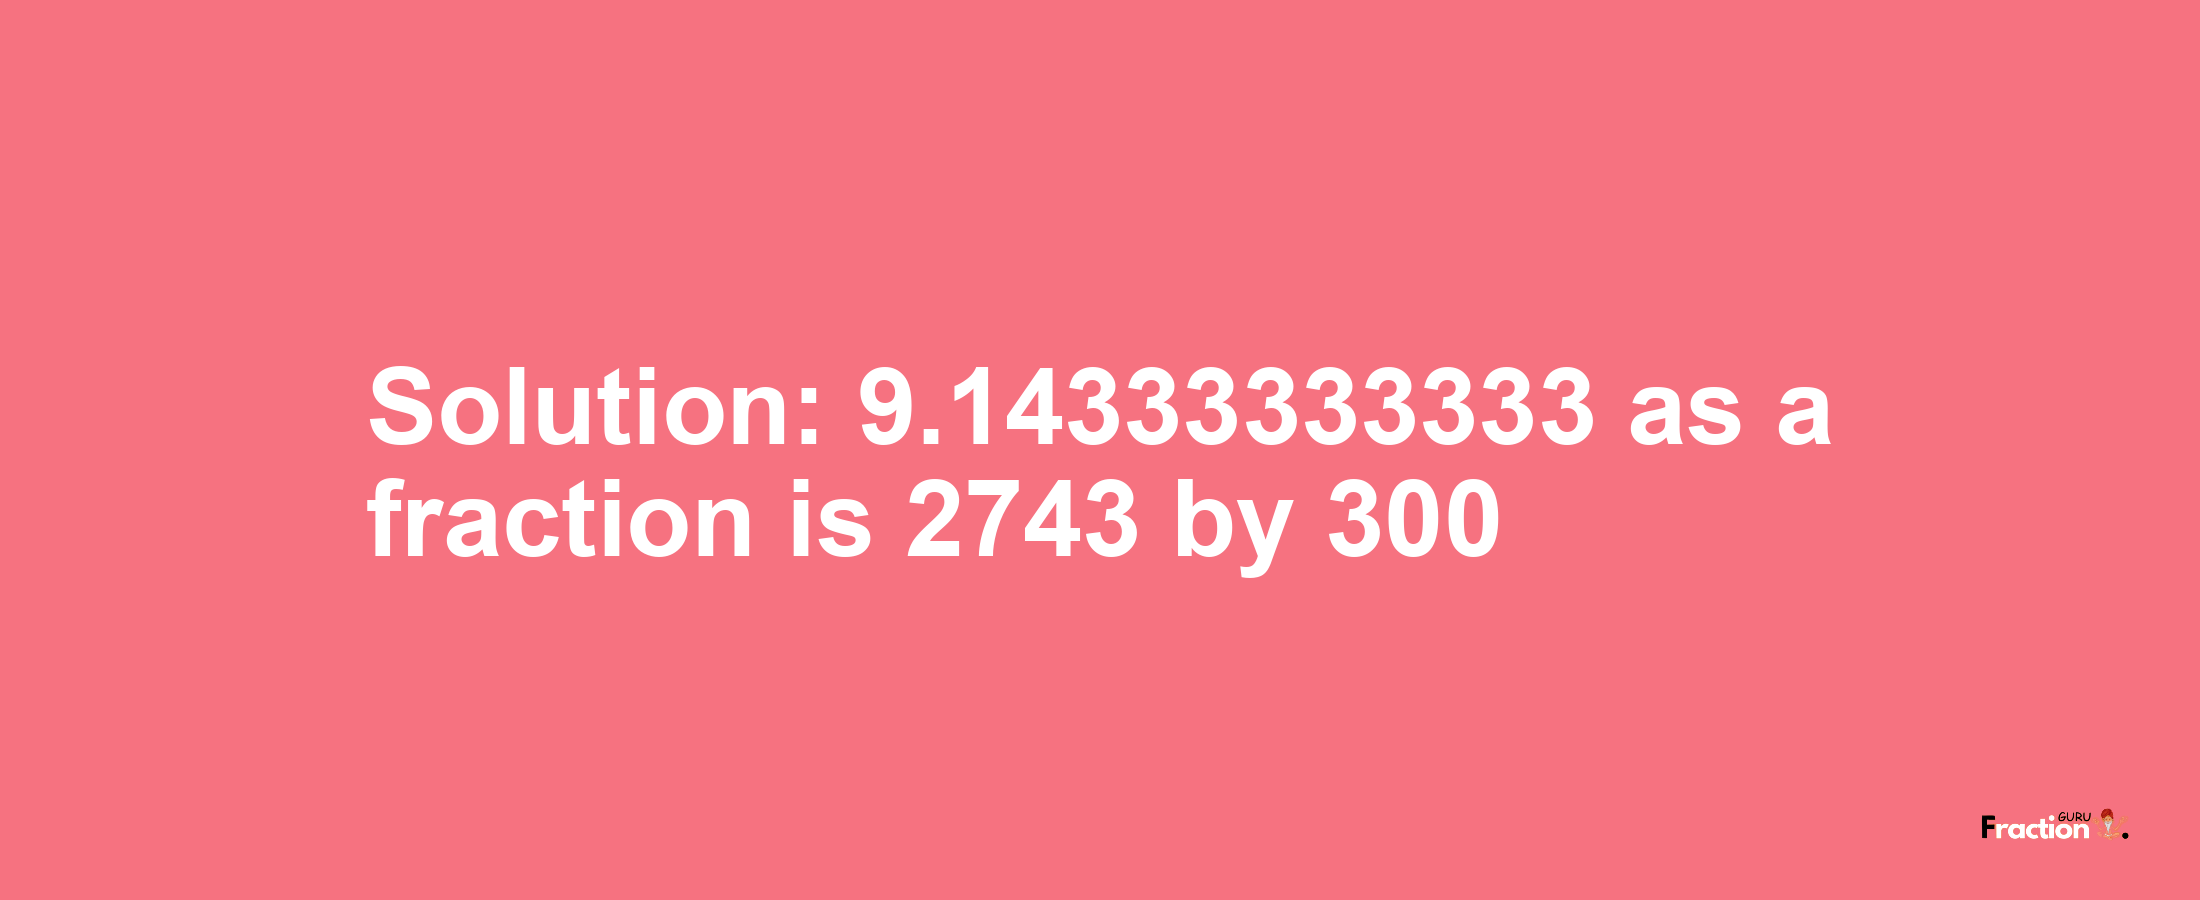 Solution:9.14333333333 as a fraction is 2743/300